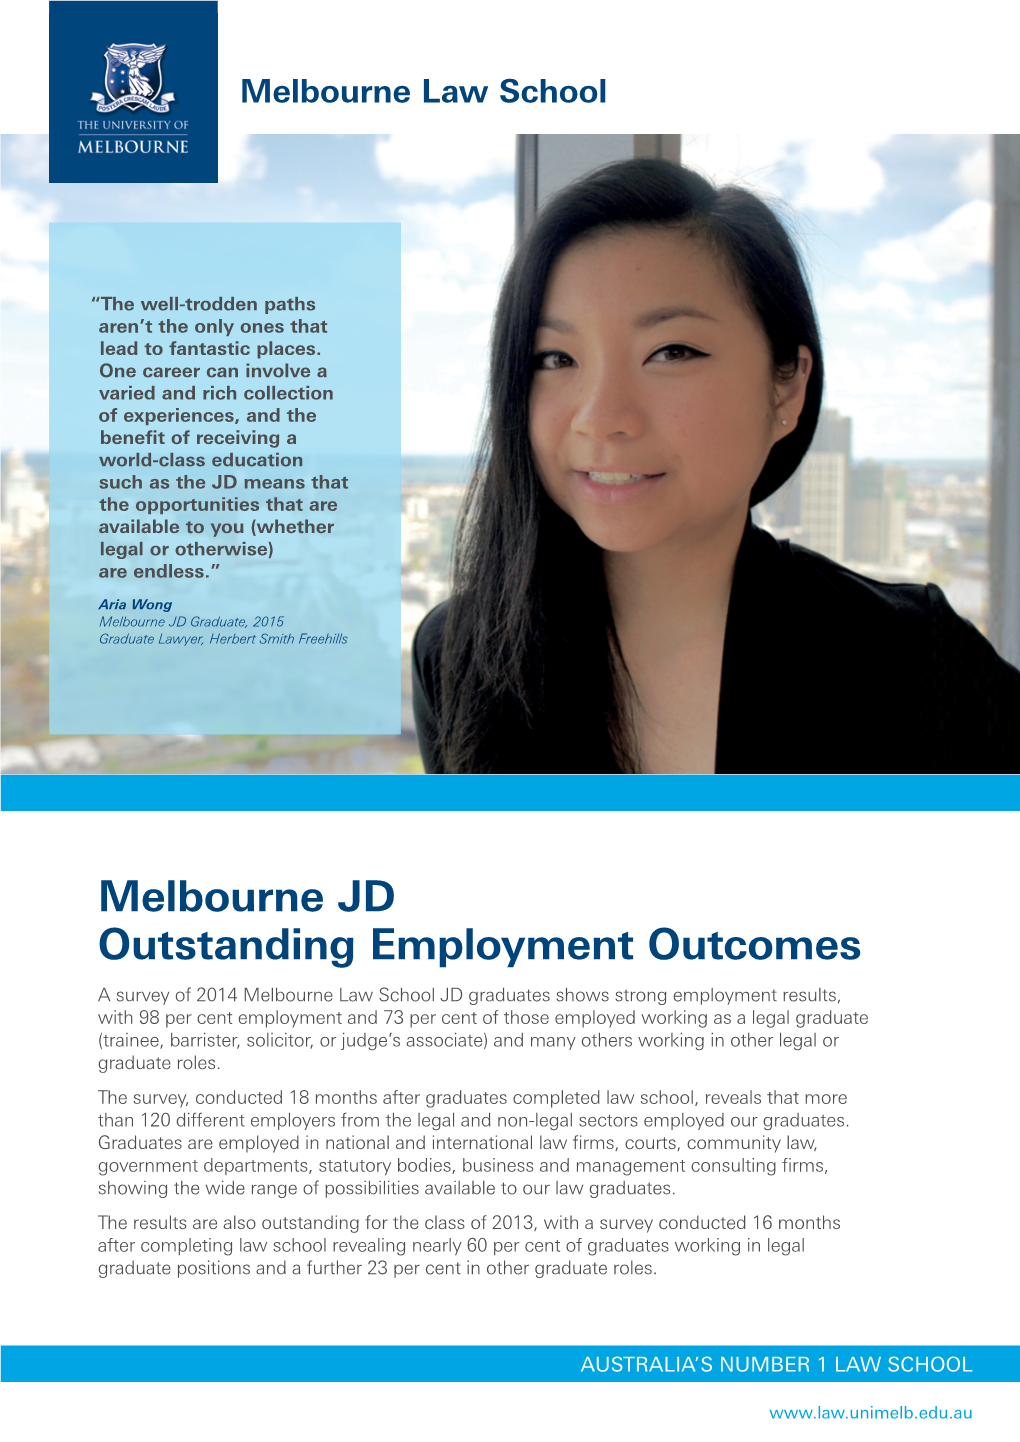 Melbourne JD Outstanding Employment Outcomes